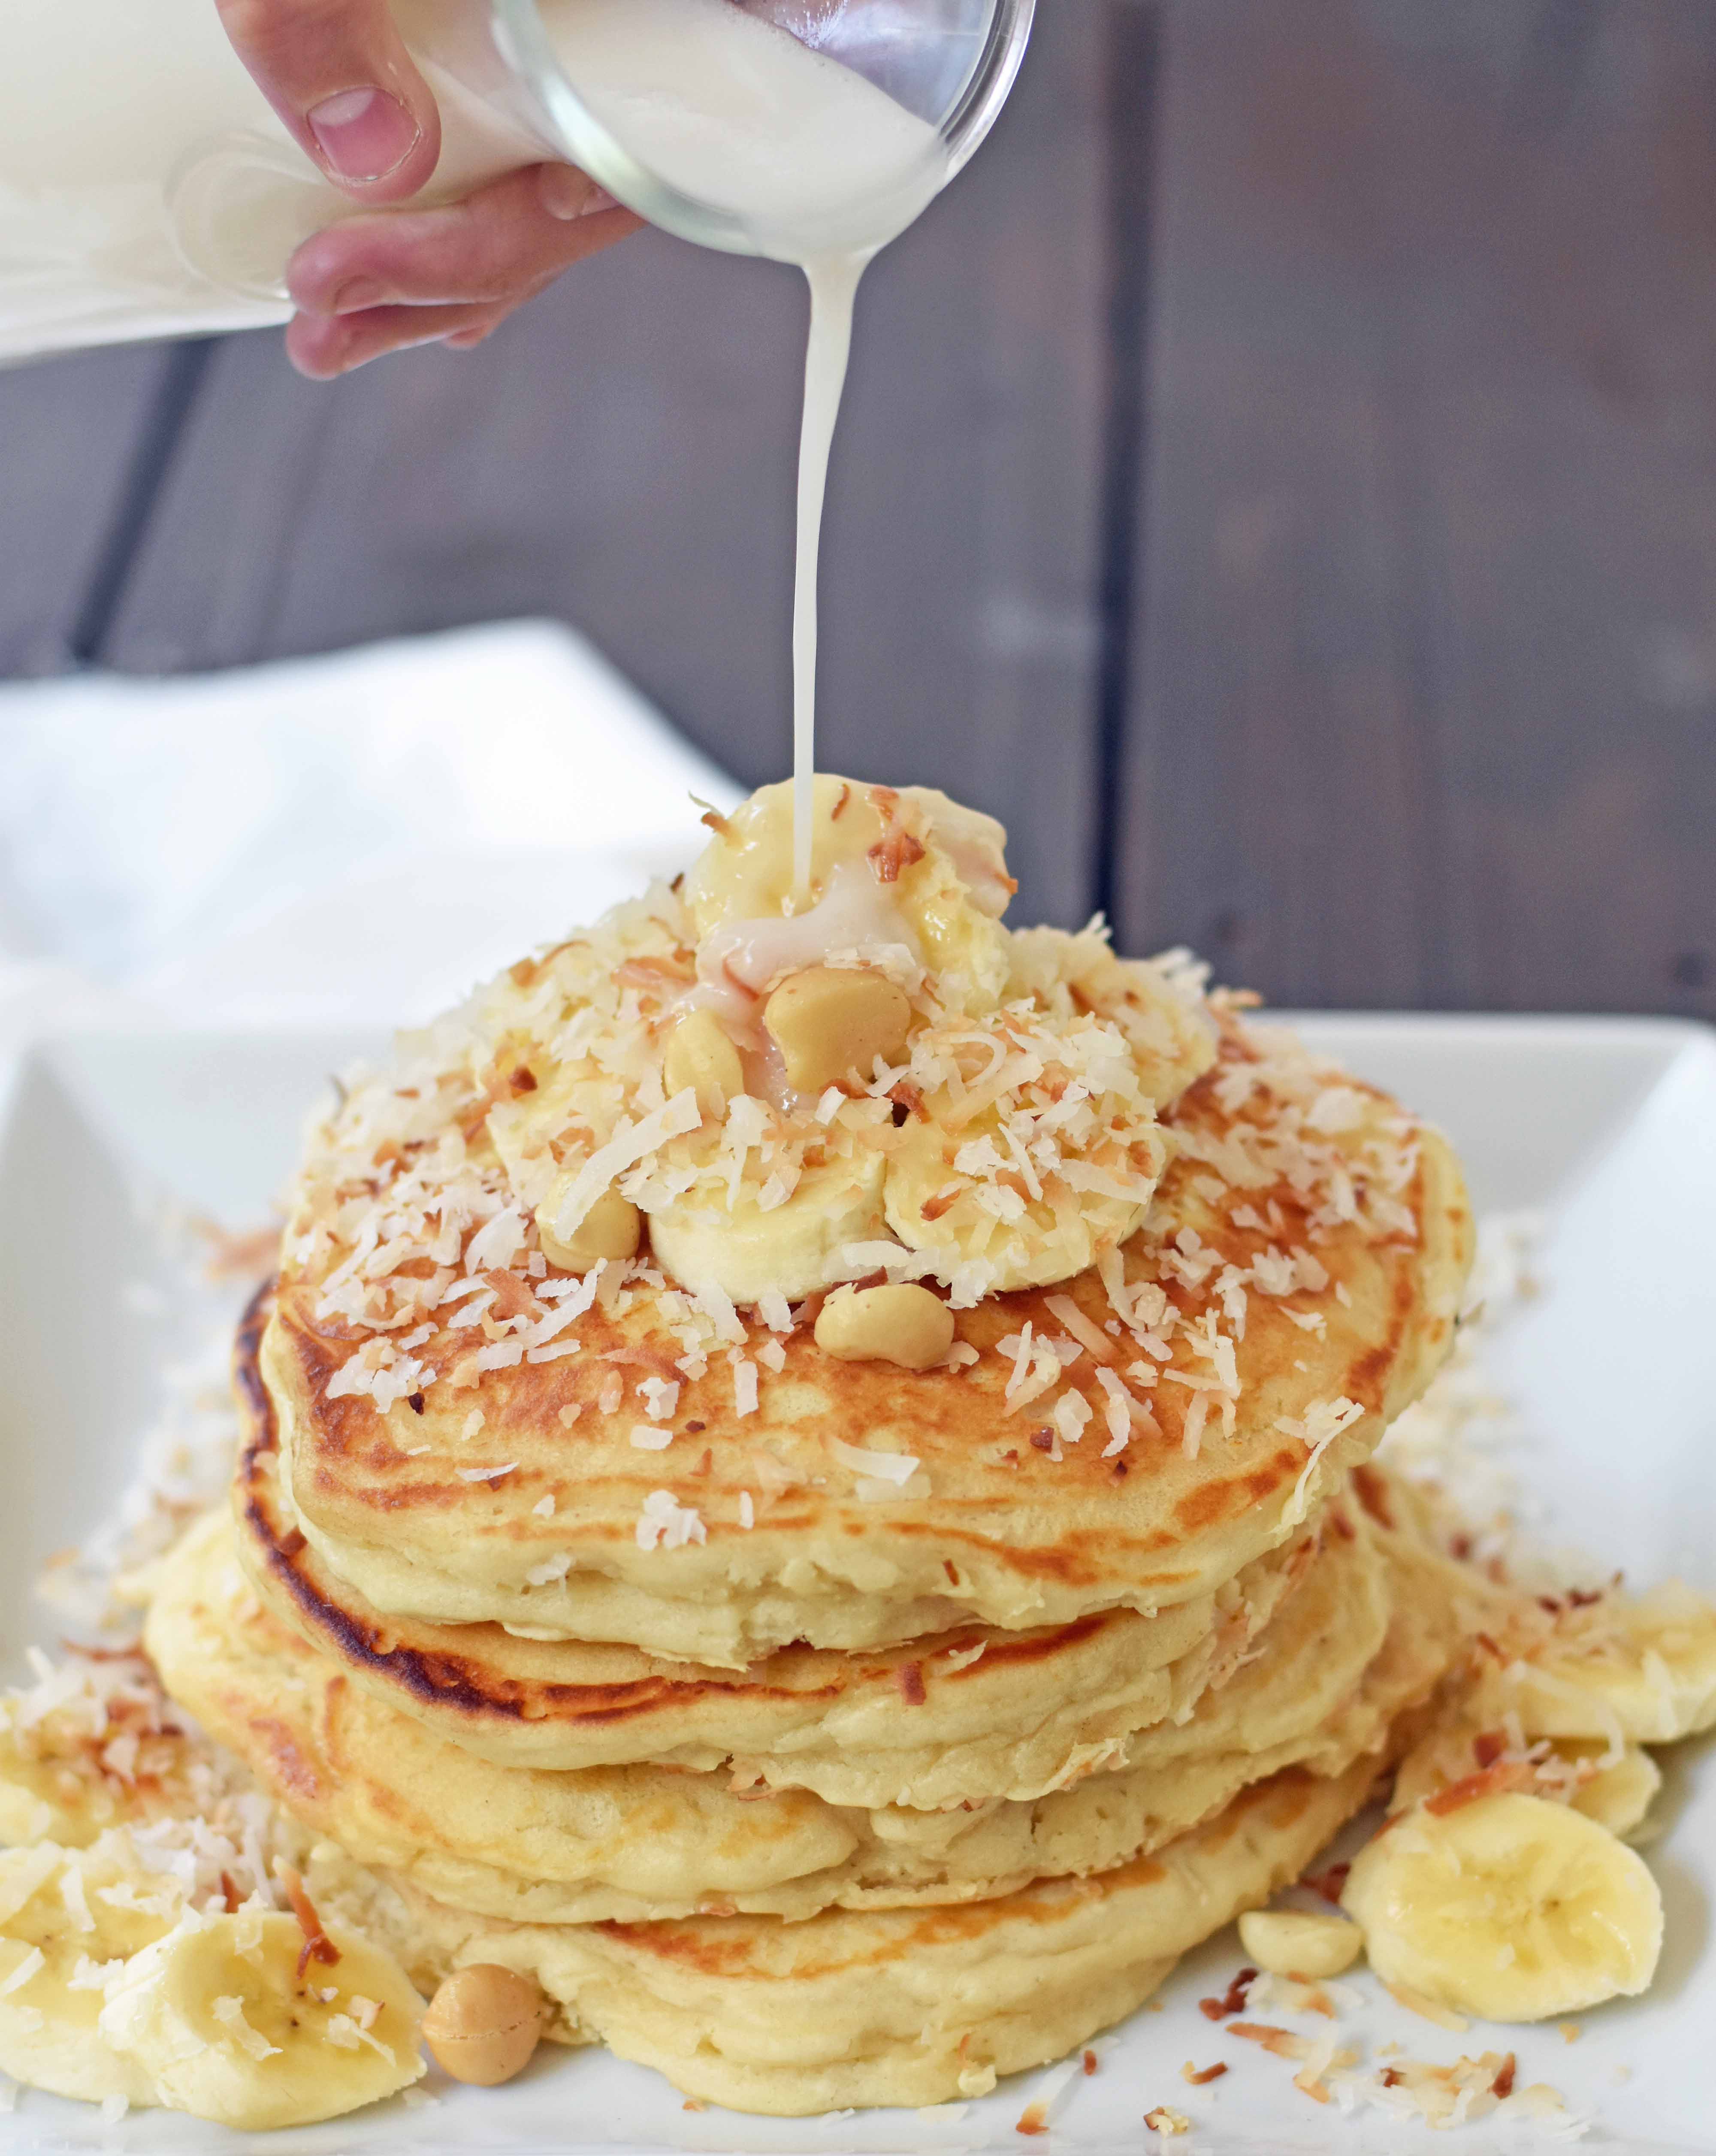 Toasted Coconut Macadamia Pancakes with Coconut Syrup are the most perfect tropical pancakes. Light and fluffy toasted coconut pancakes topped with homemade coconut syrup and macadamia nuts. www.modernhoney.com